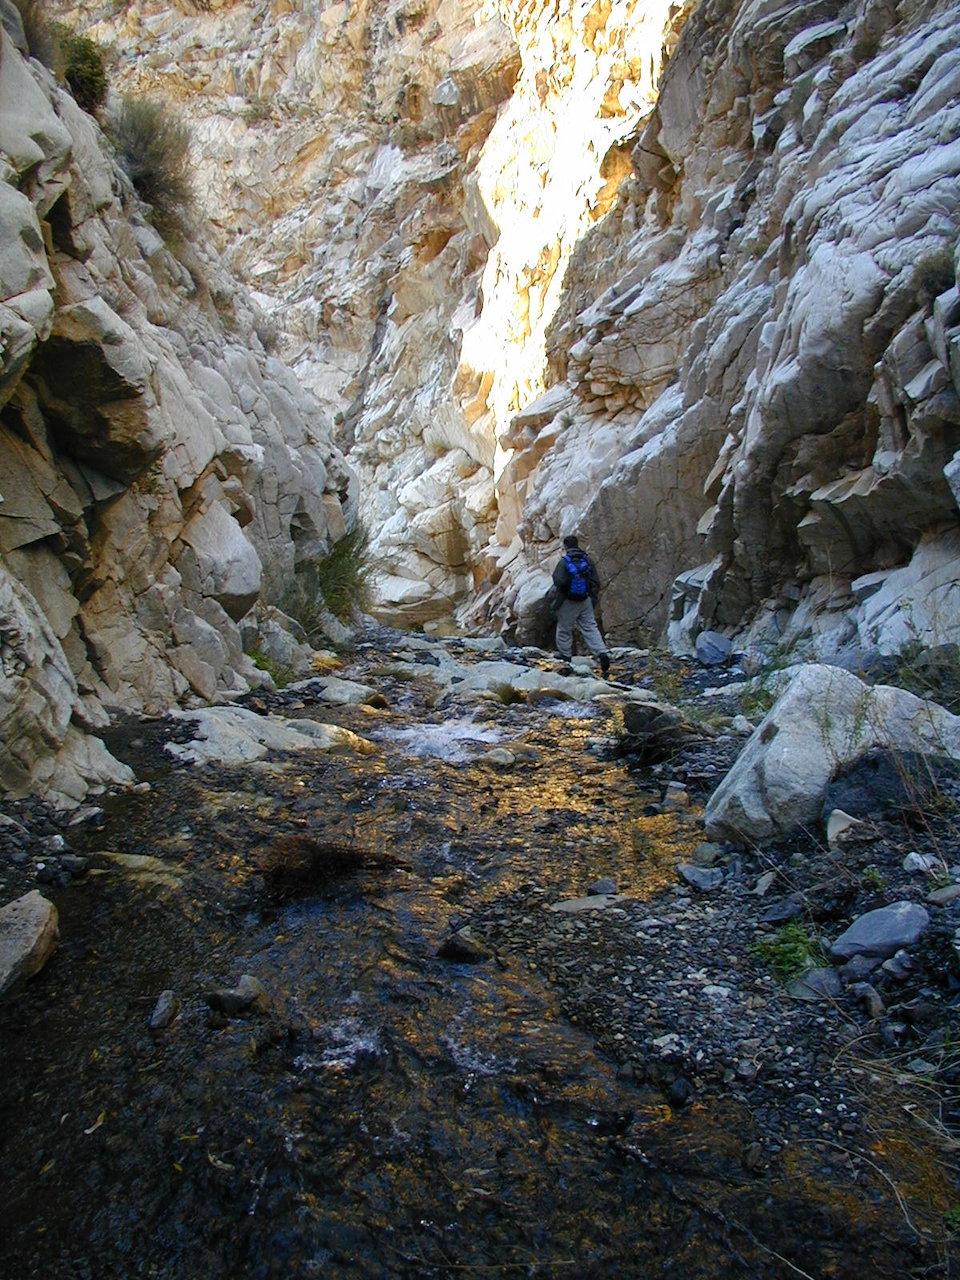 Surprise Canyon Creek at Death Valley has been designated a wild river/NPS